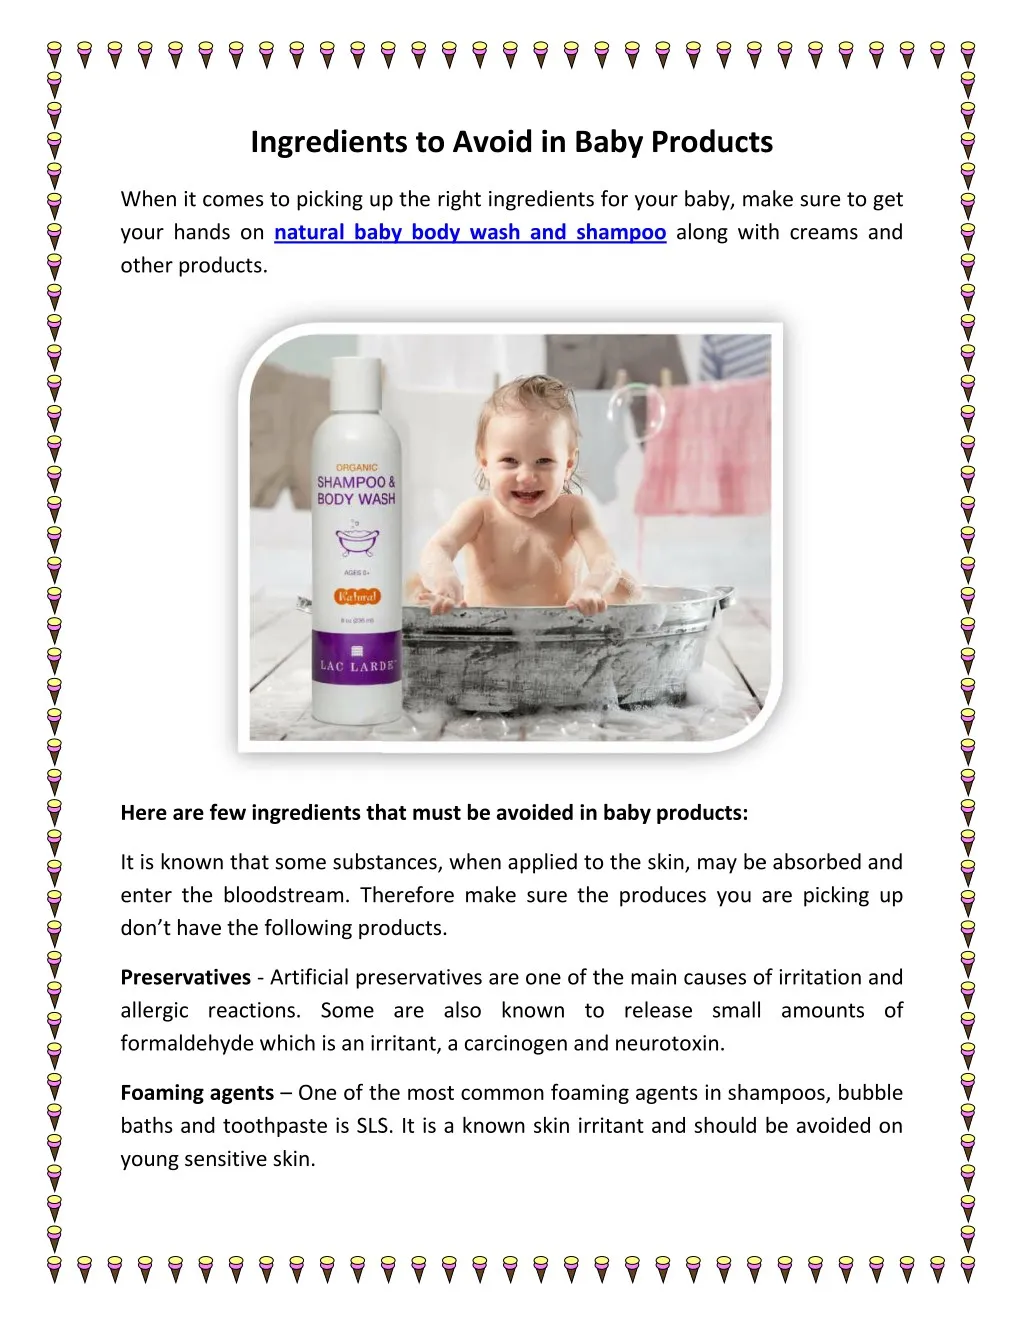 ingredients to avoid in baby products ingredients